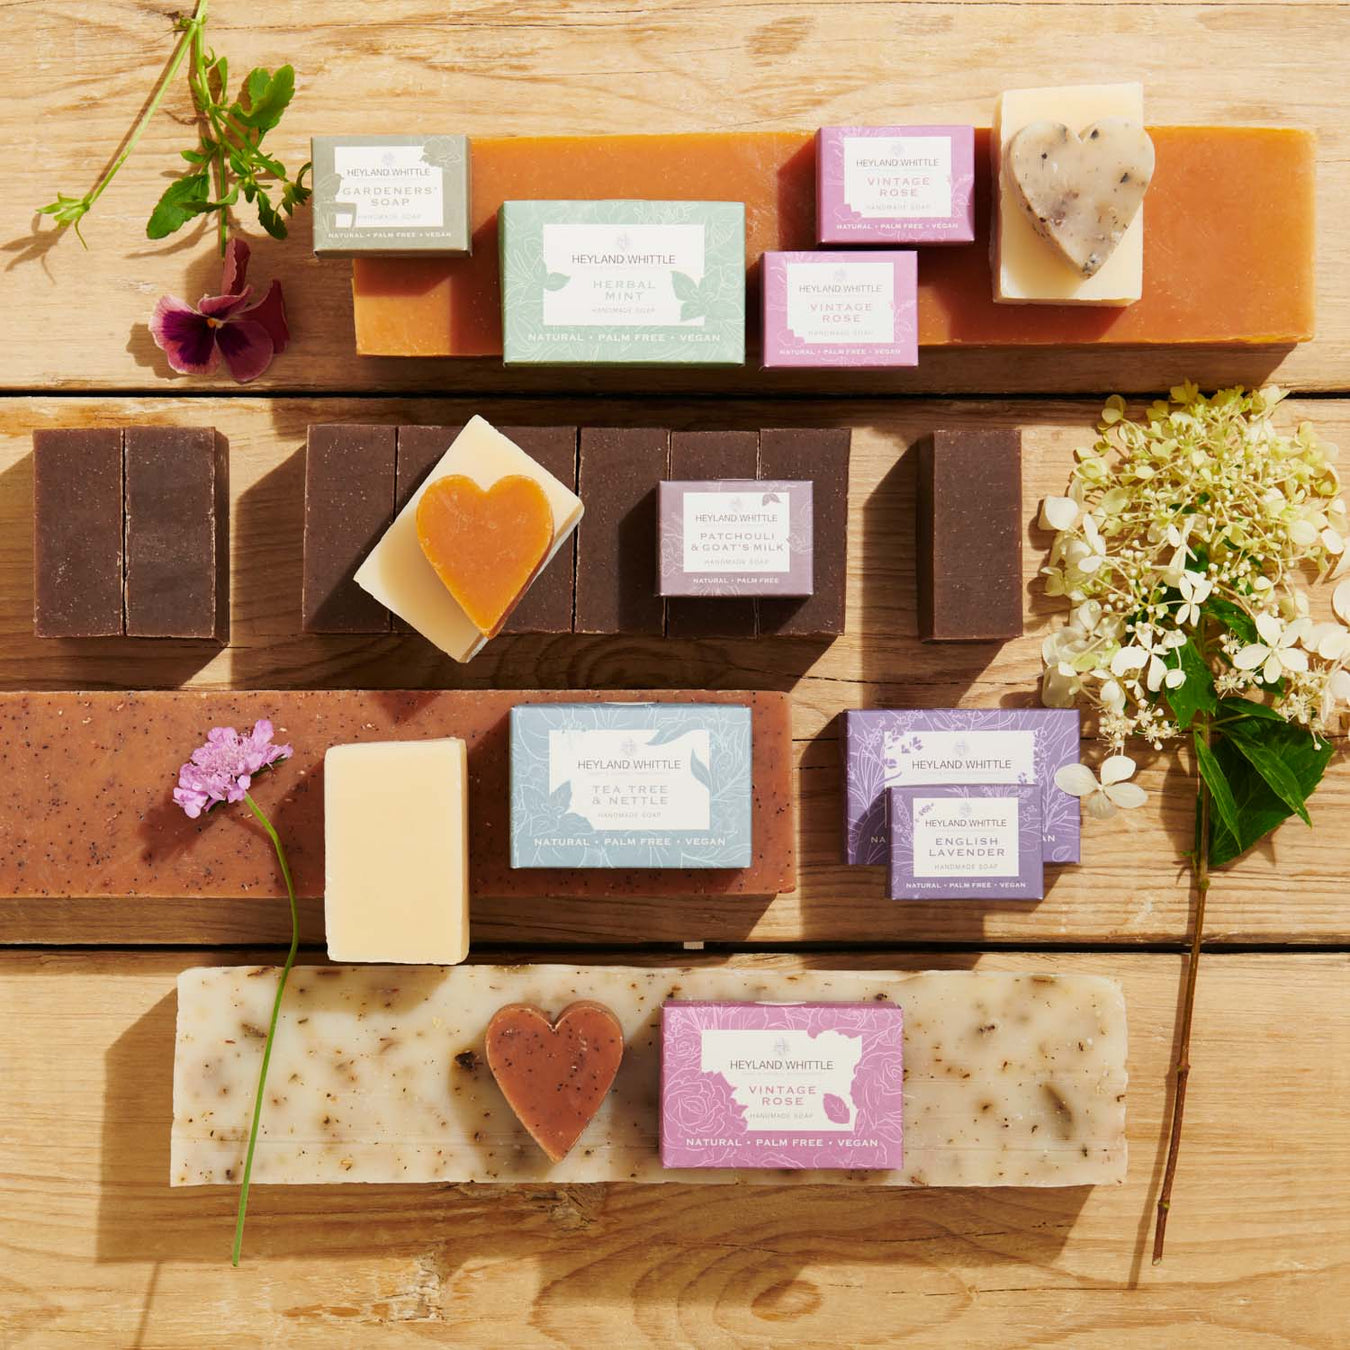 Palm free handmade soap with 100% natural ingredients.